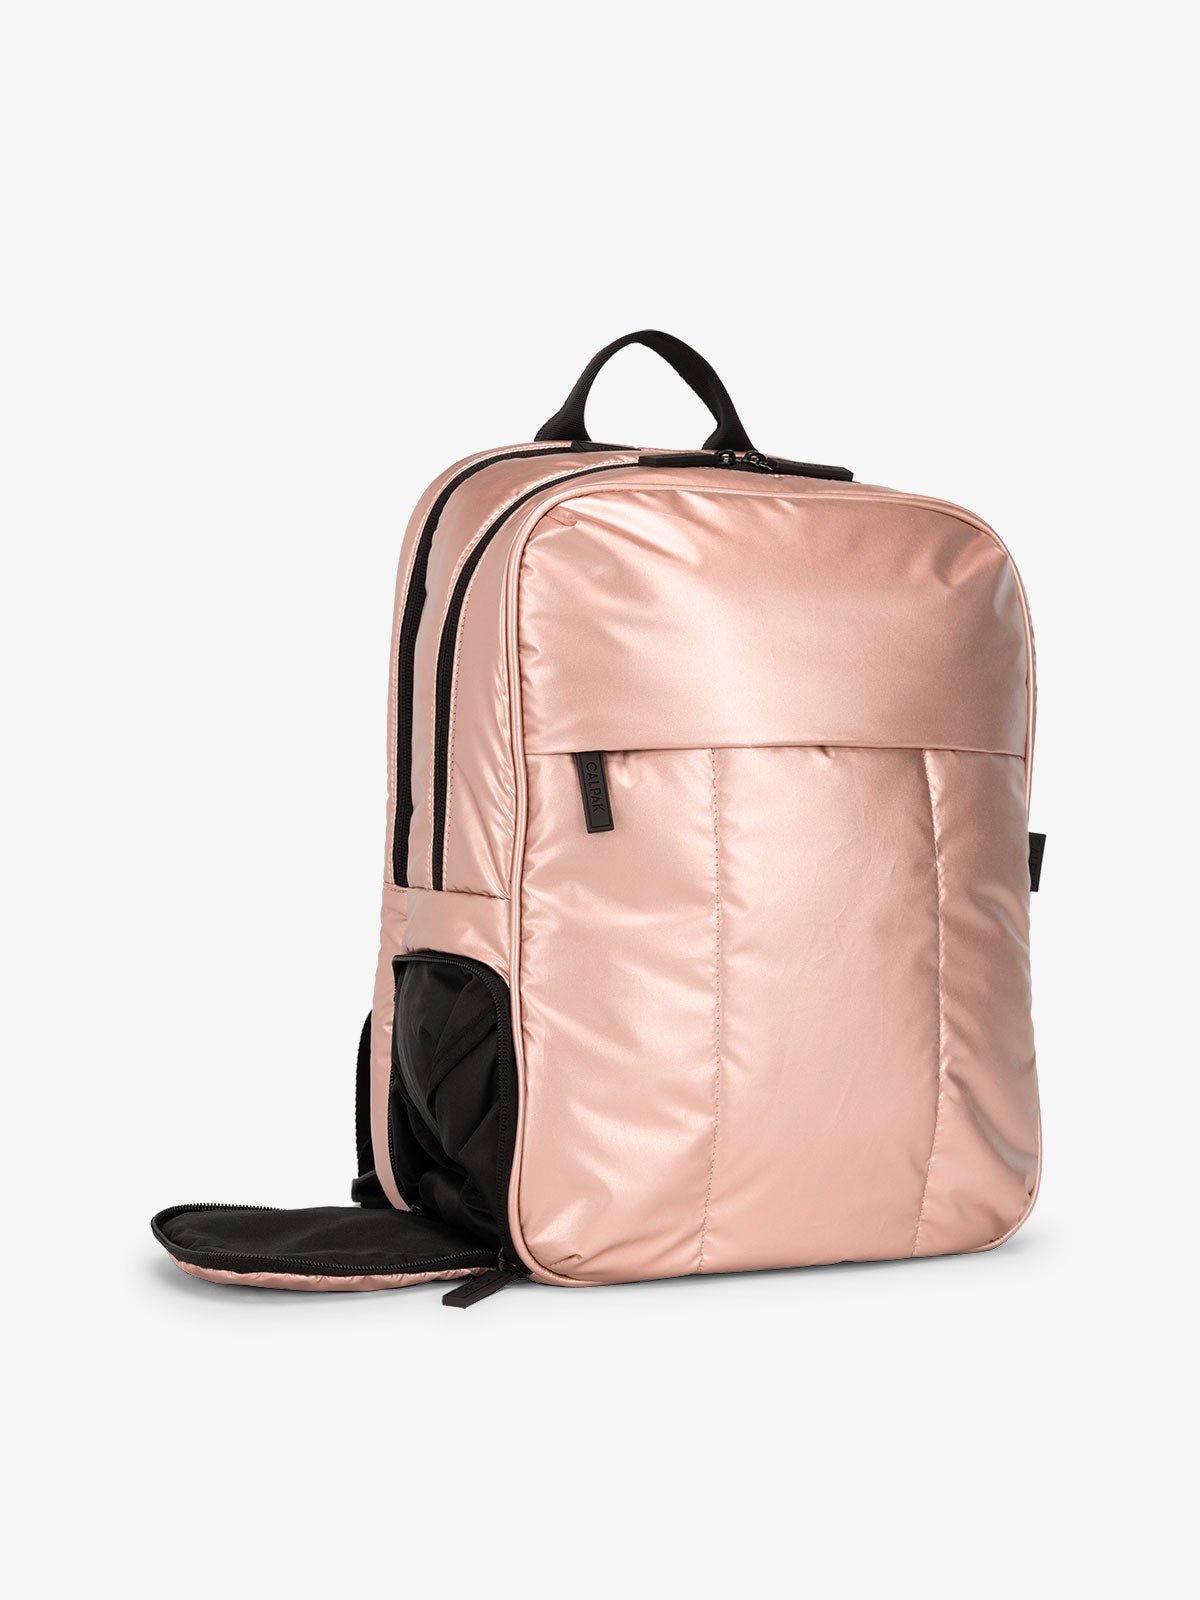 CALPAK Luka Laptop travel Backpack with shoe compartment in metallic pink rose gold